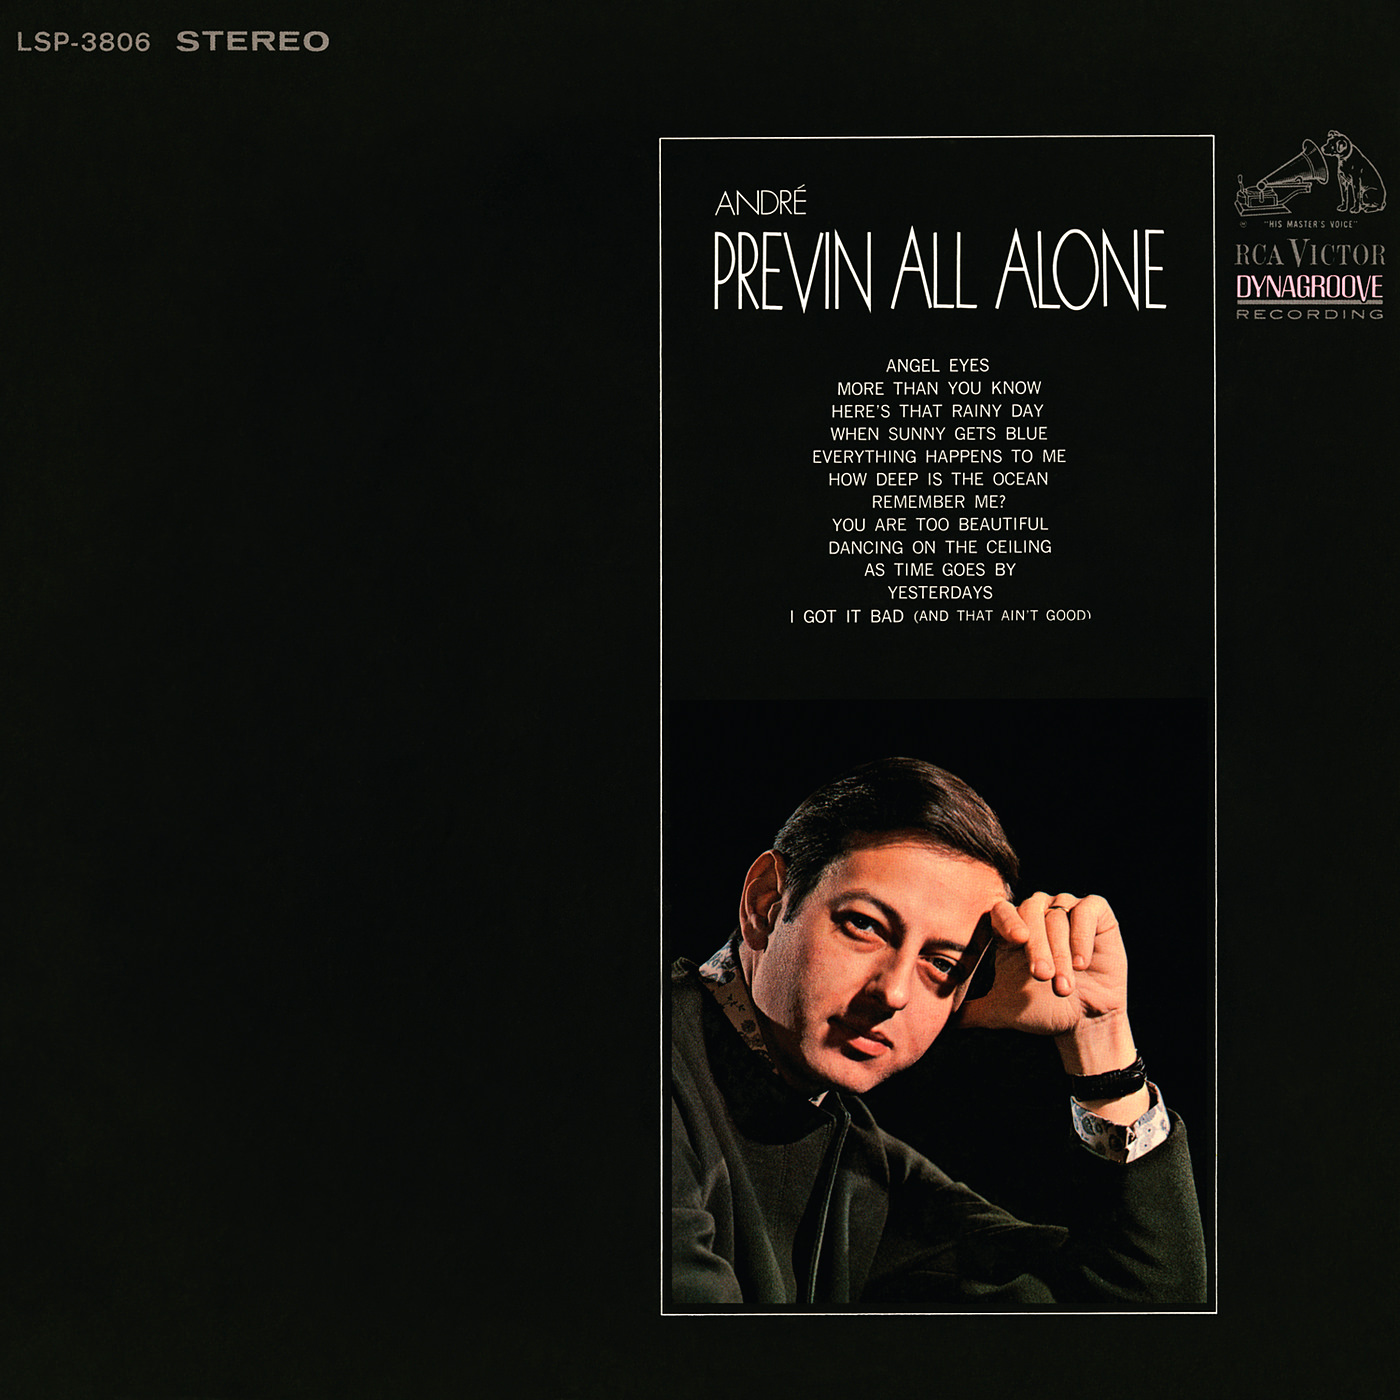 Andre Previn – All Alone (1967/2017) [AcousticSounds FLAC 24bit/192kHz]